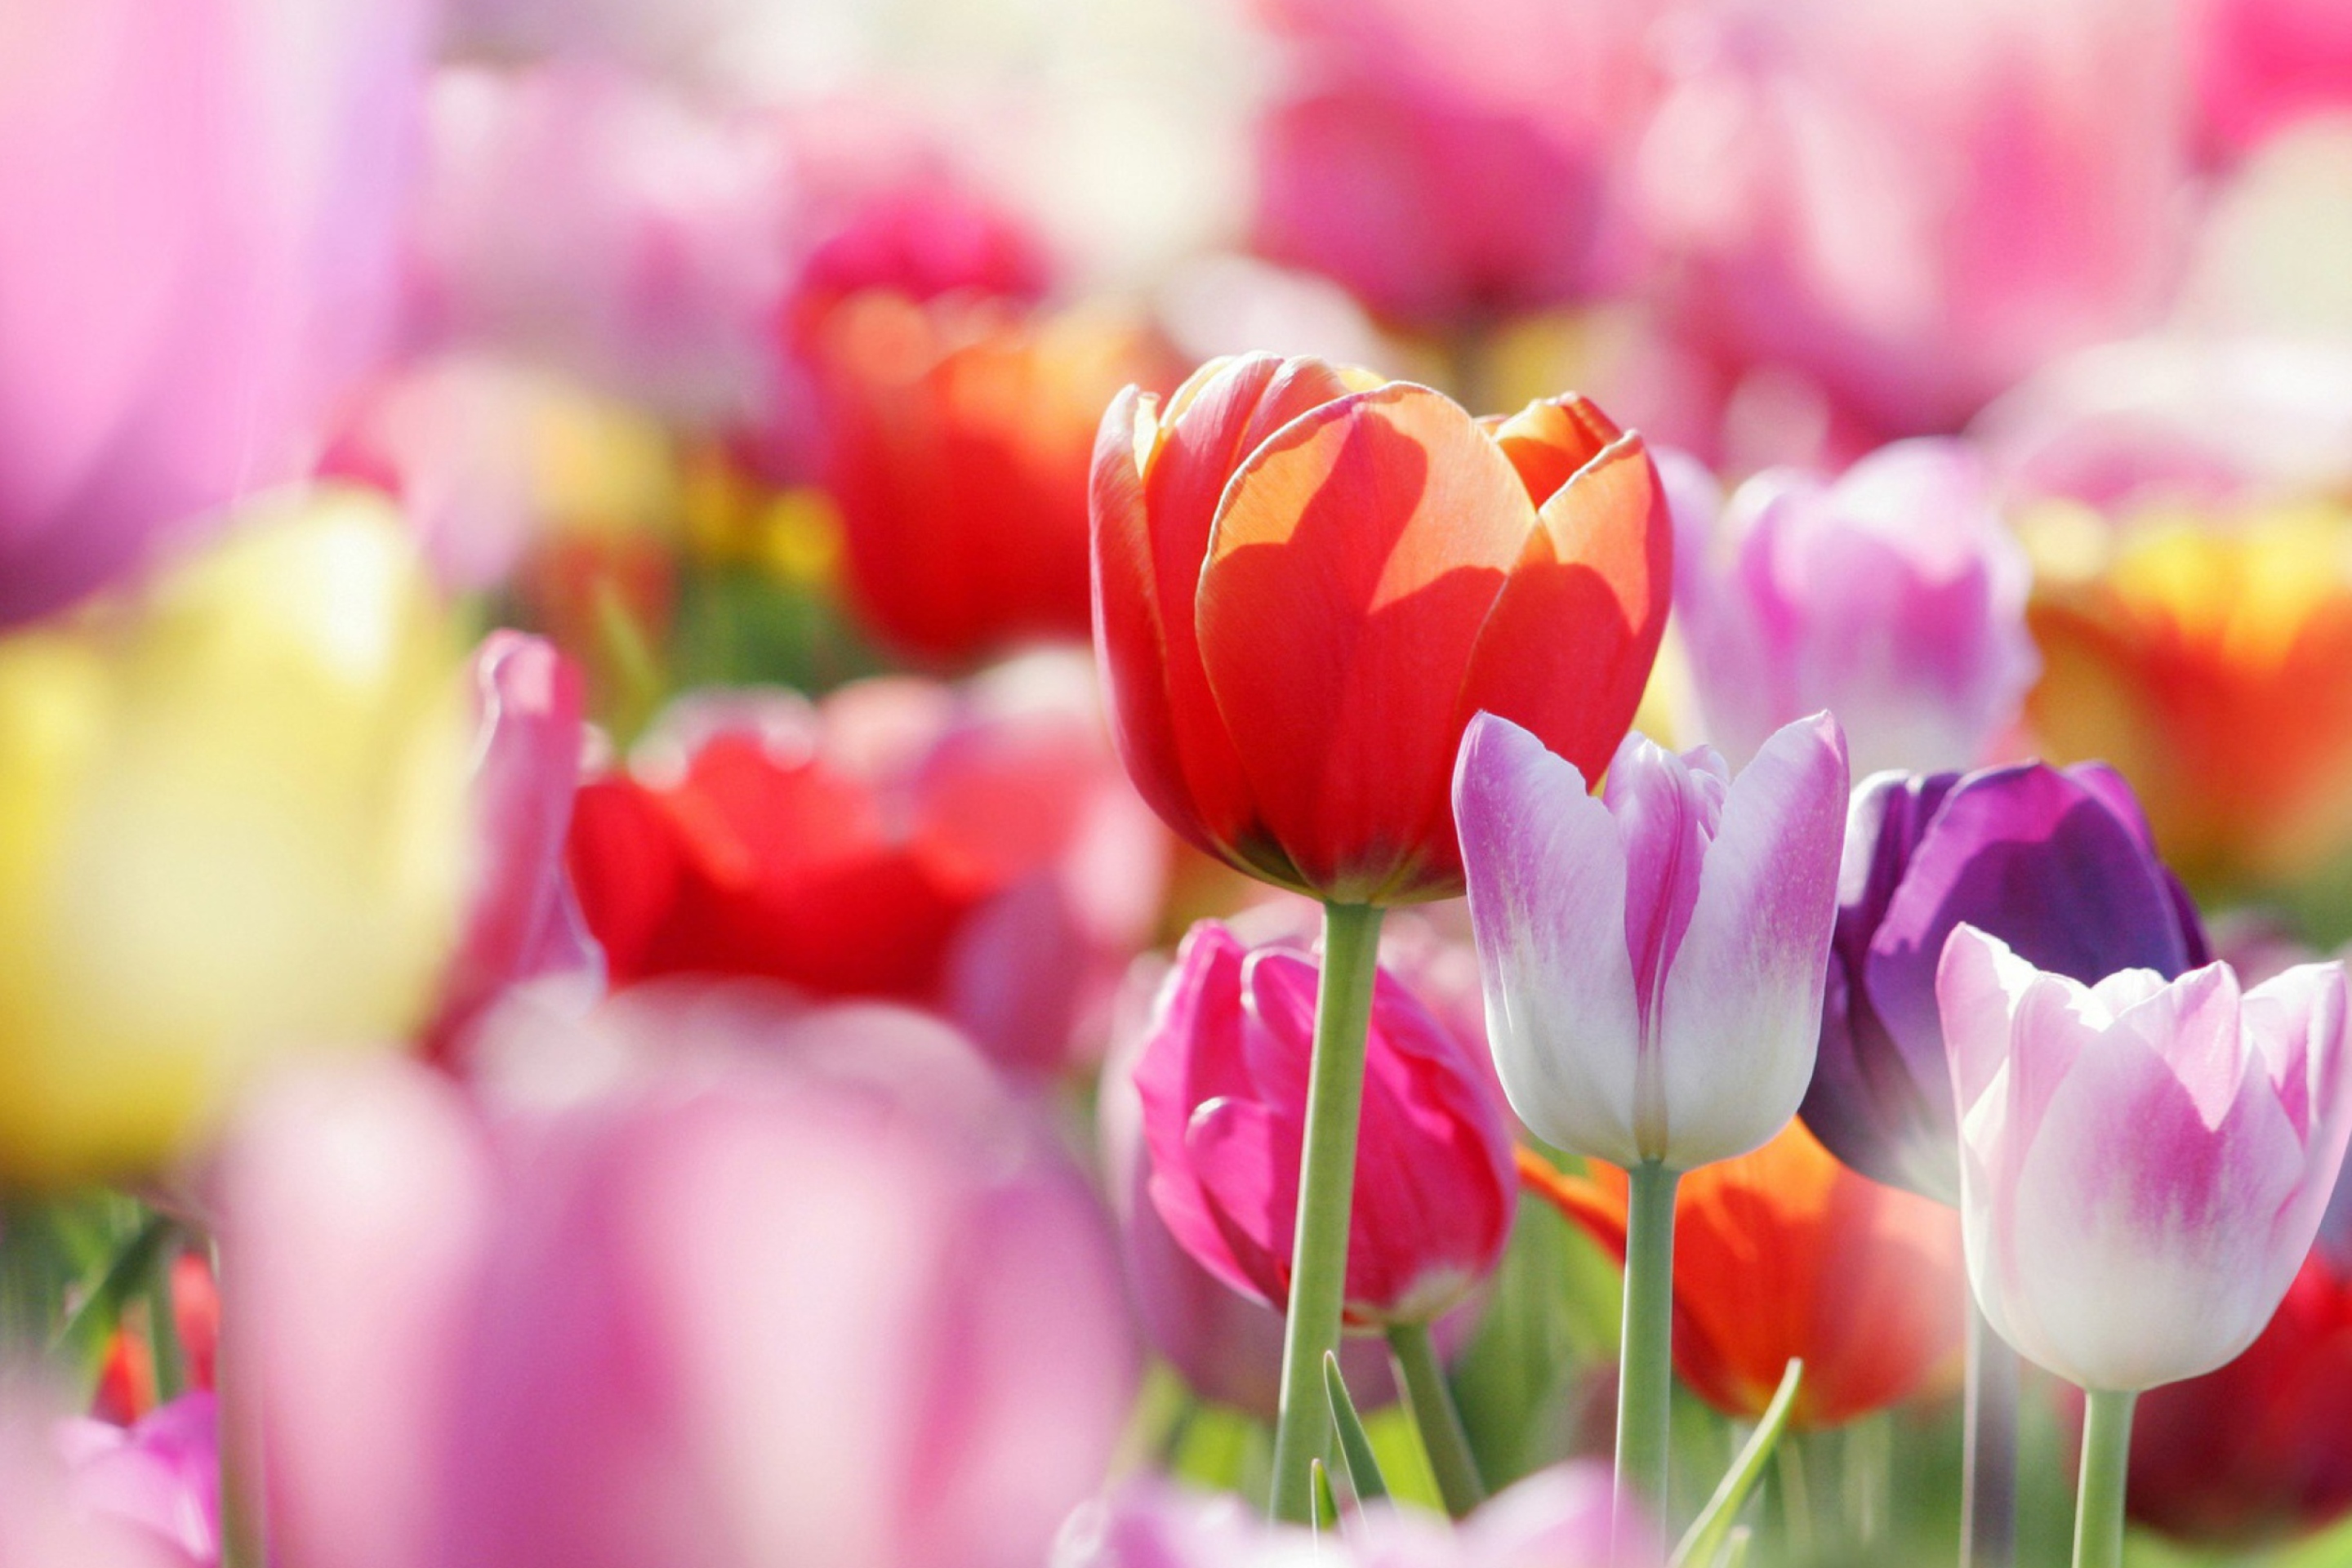 Colorful Tulips wallpaper 2880x1920